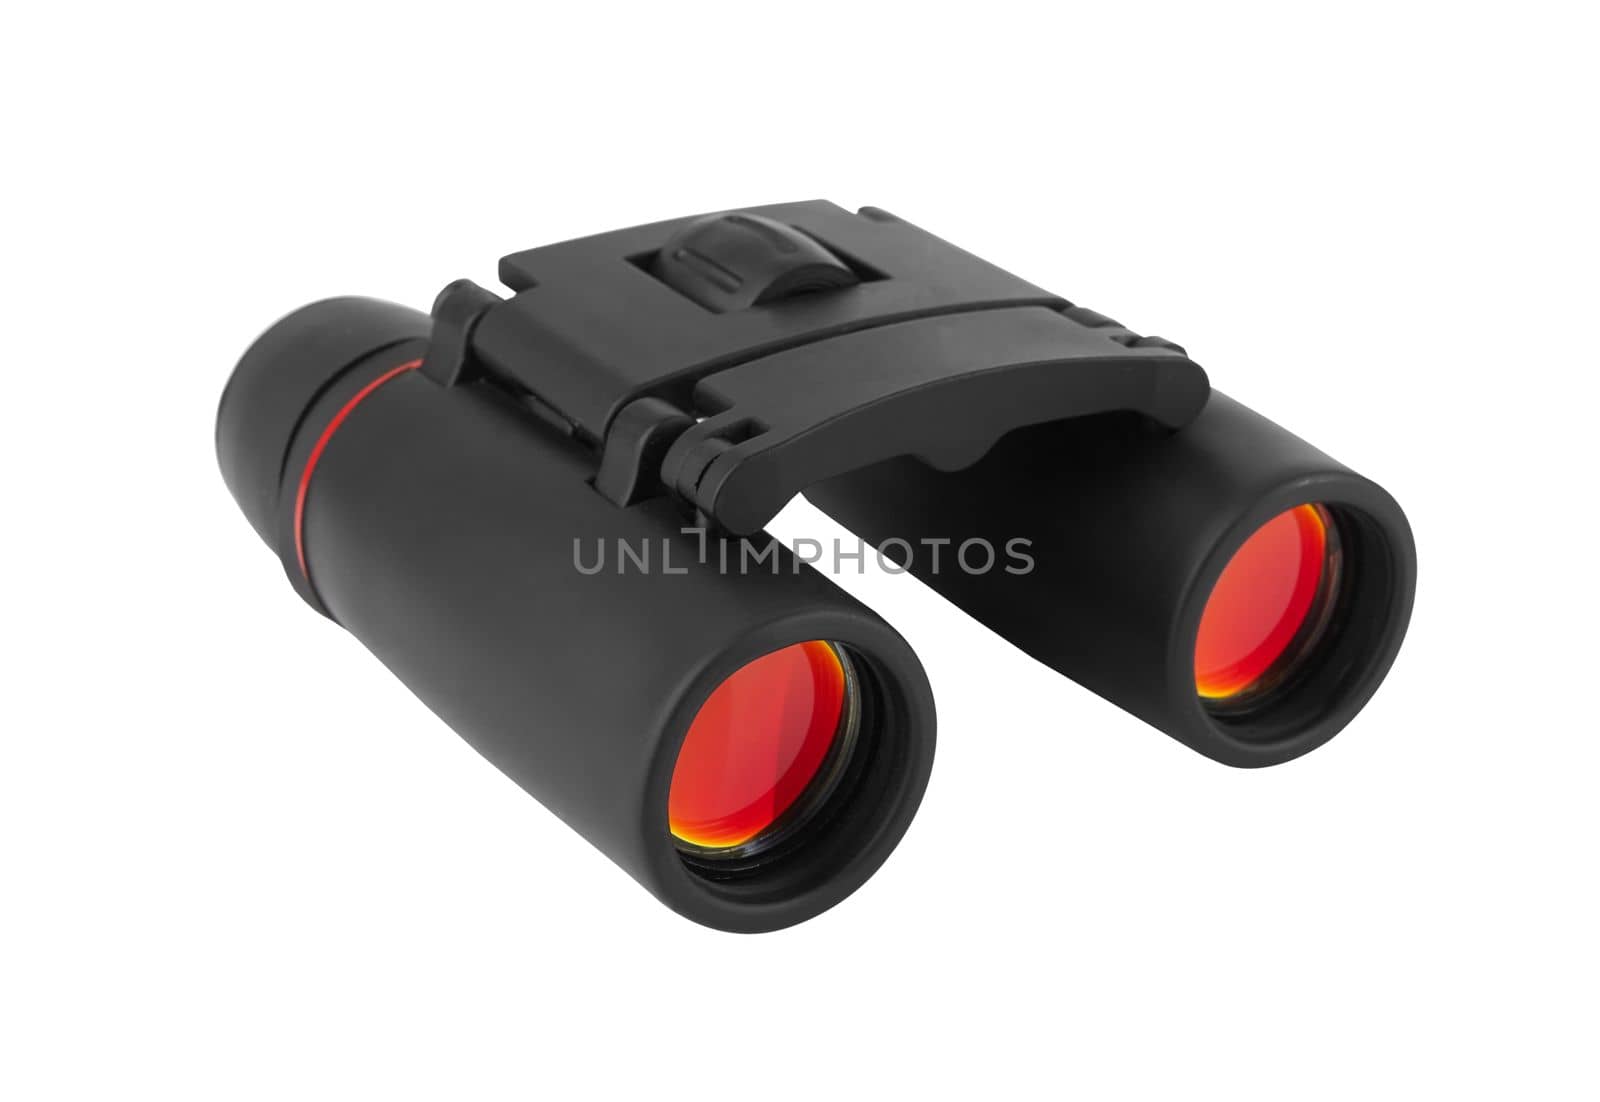 Binocular isolated on a white background